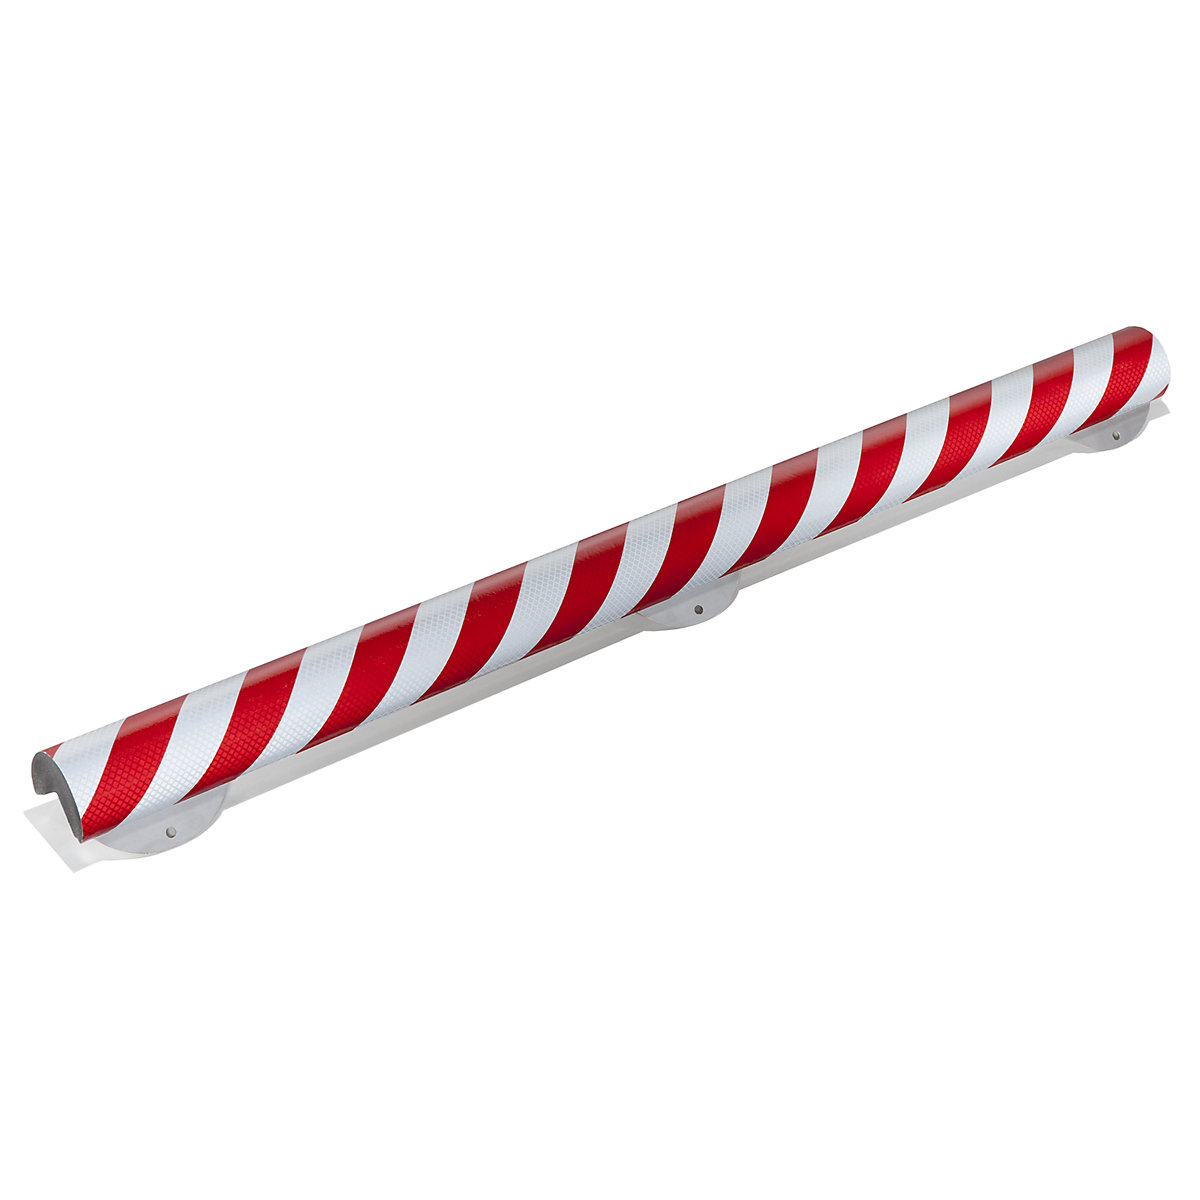 Knuffi® corner protection with mounting rail – SHG, type A+, 1 m piece, red / white reflective-12